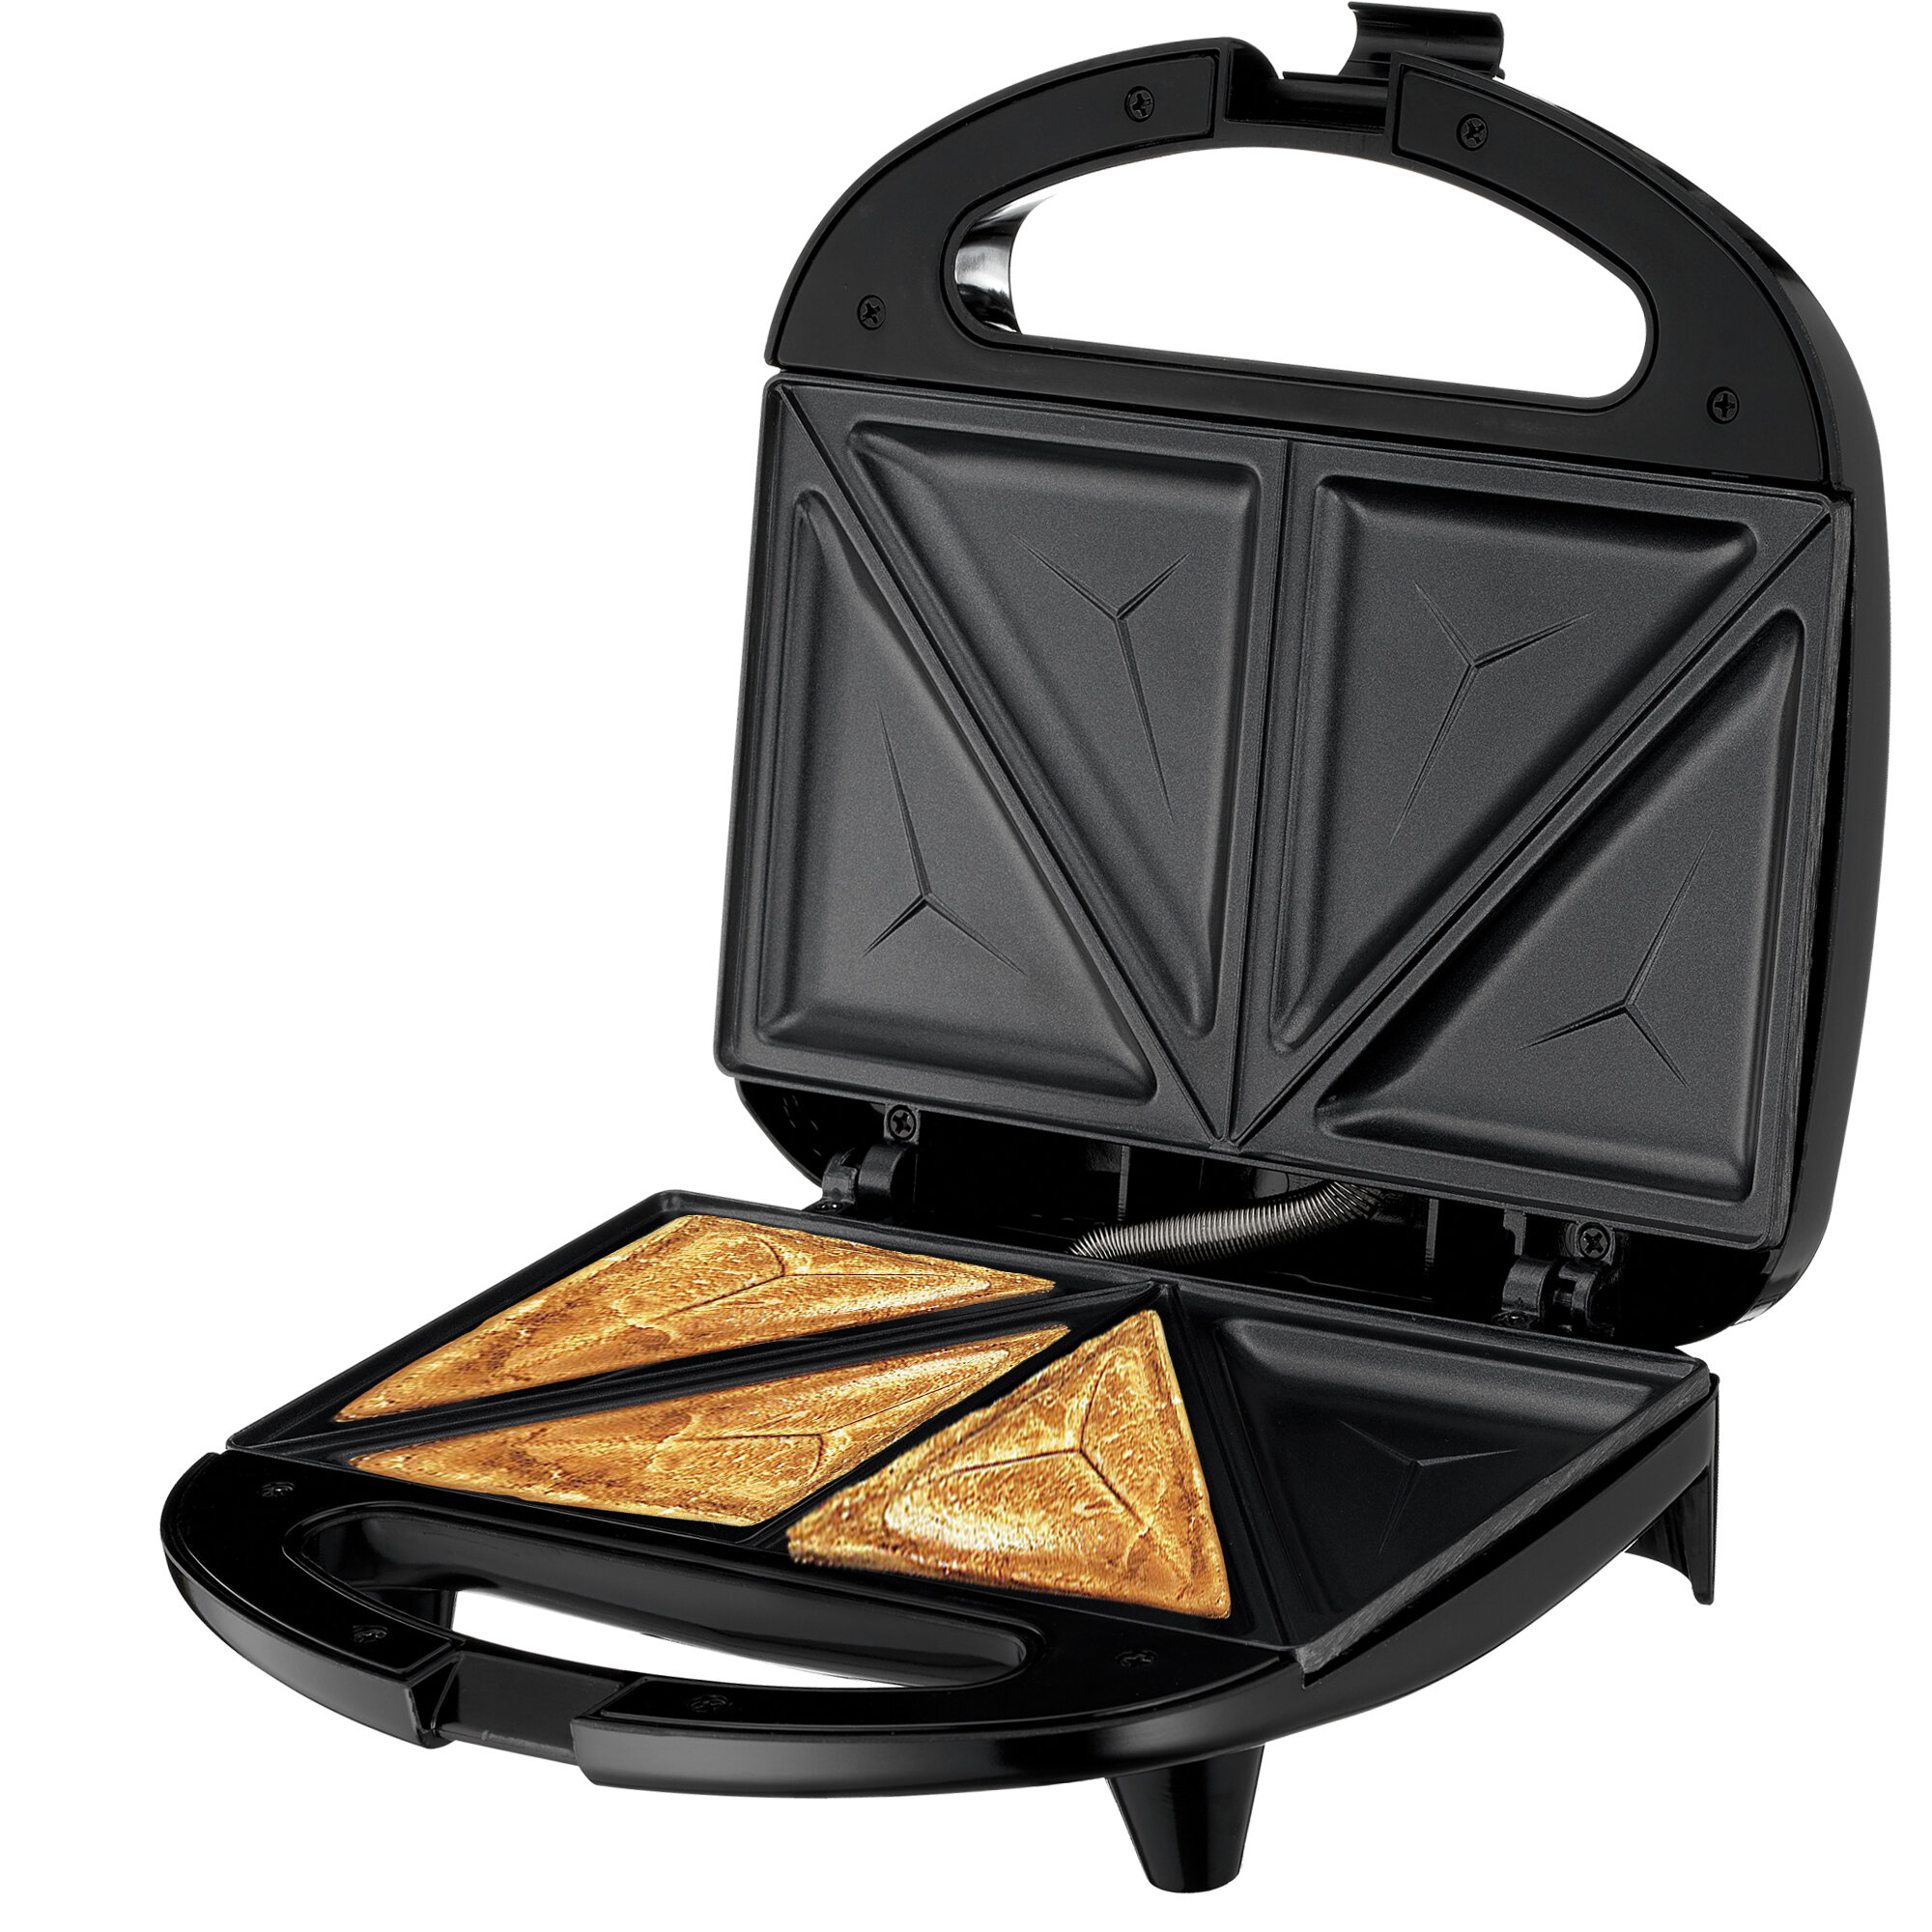 Sandwich Toaster Electric Warm Toast Maker 700 W Non Stick Stainless Steal Pan 